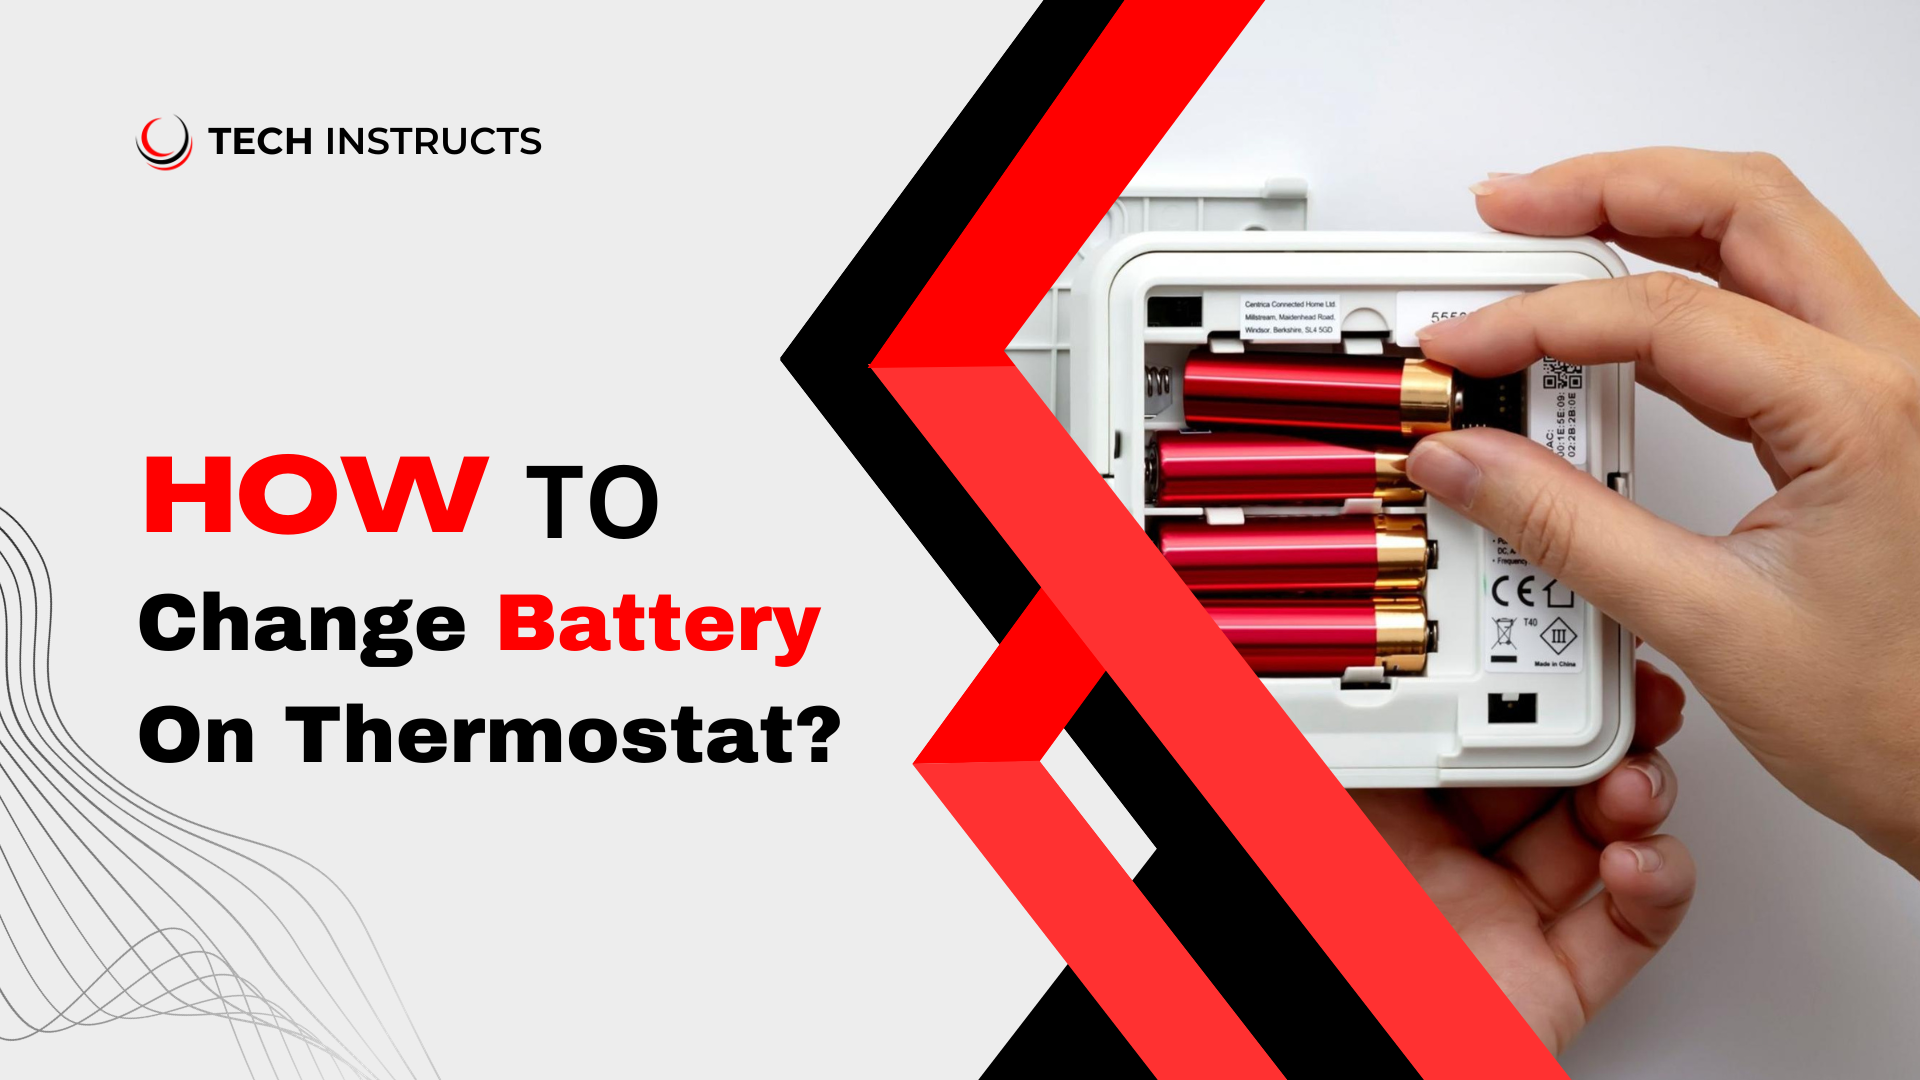 How to Change a Thermostat Battery - Service Champions